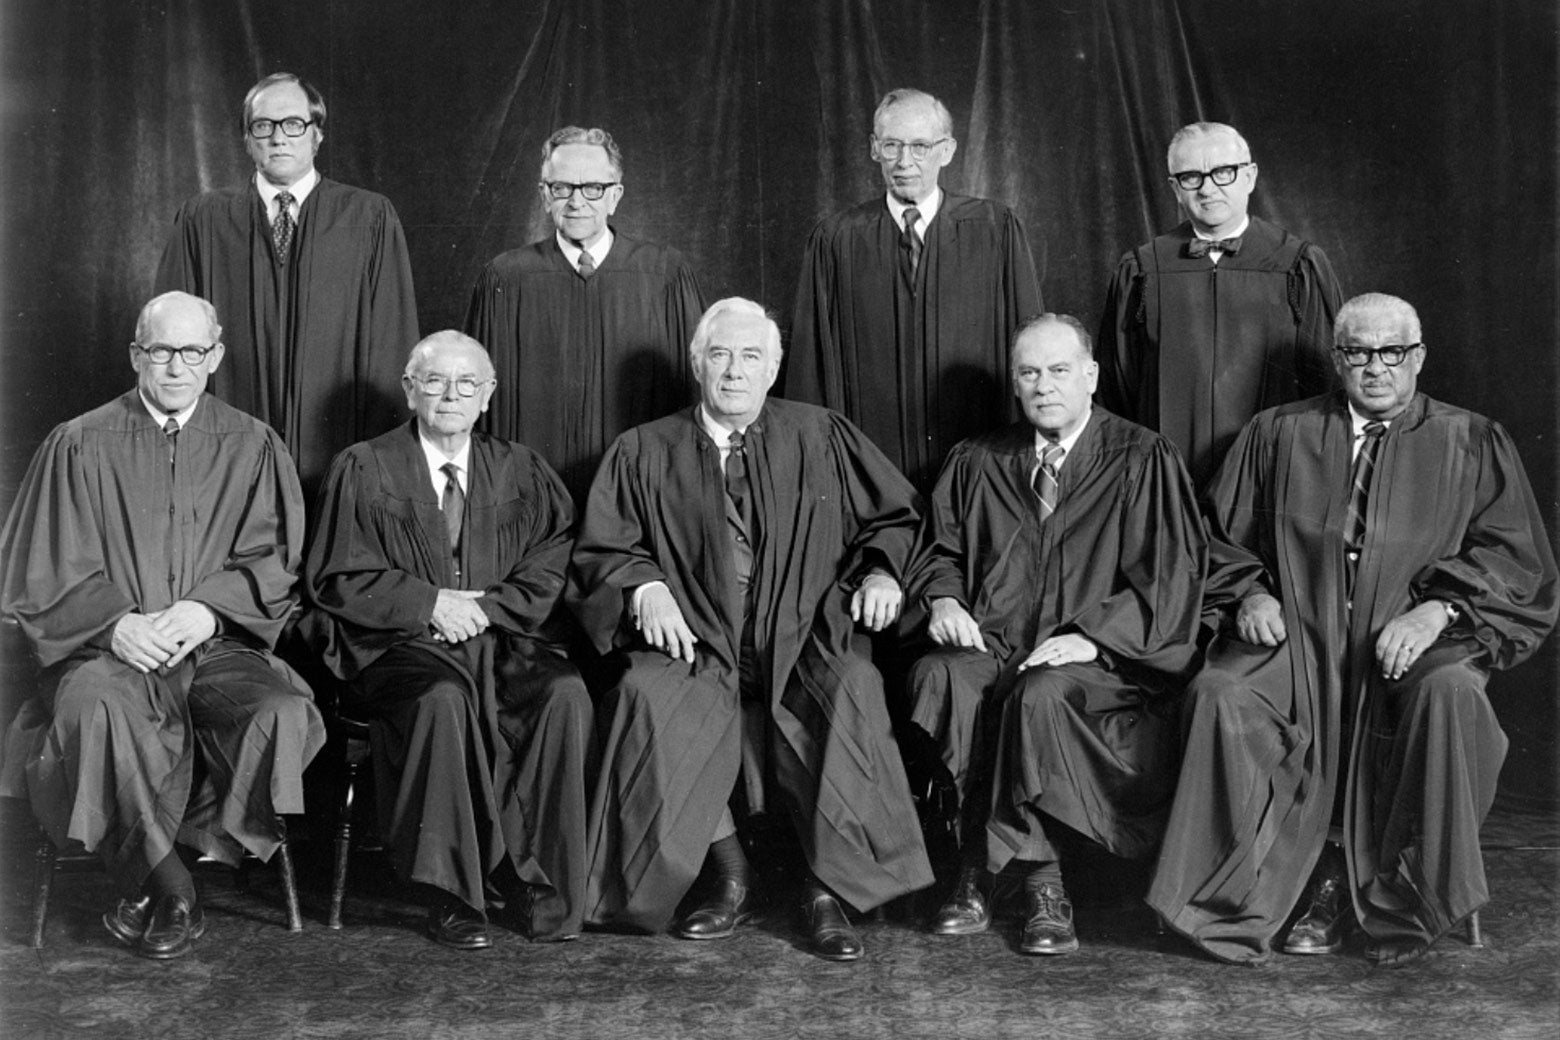 Nine men in robes pose for a photo.